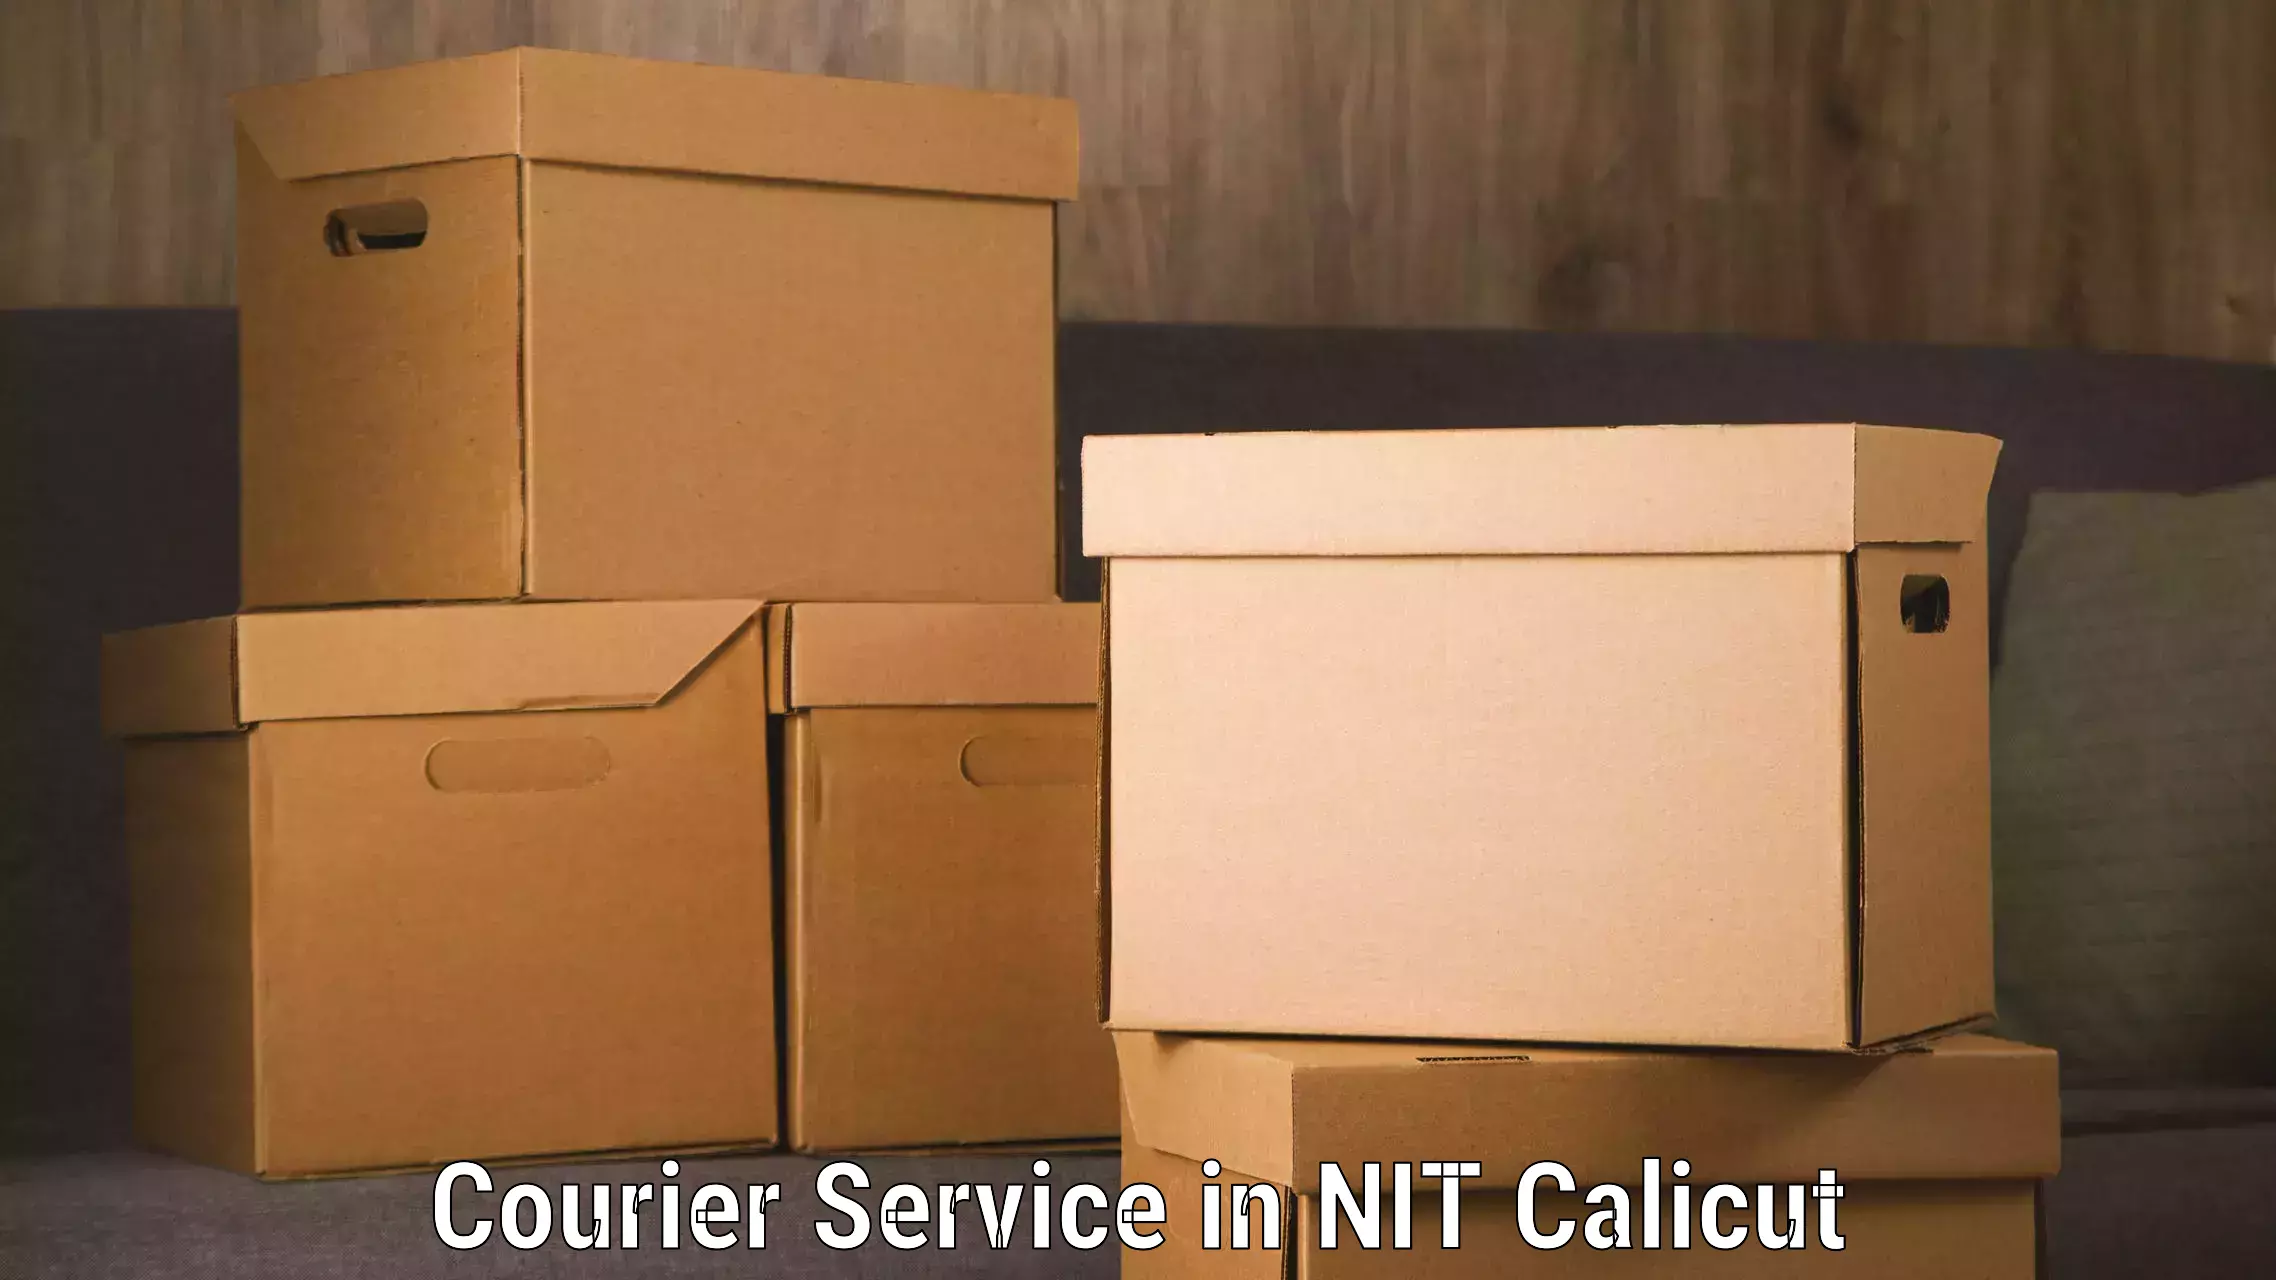 End-to-end delivery in NIT Calicut